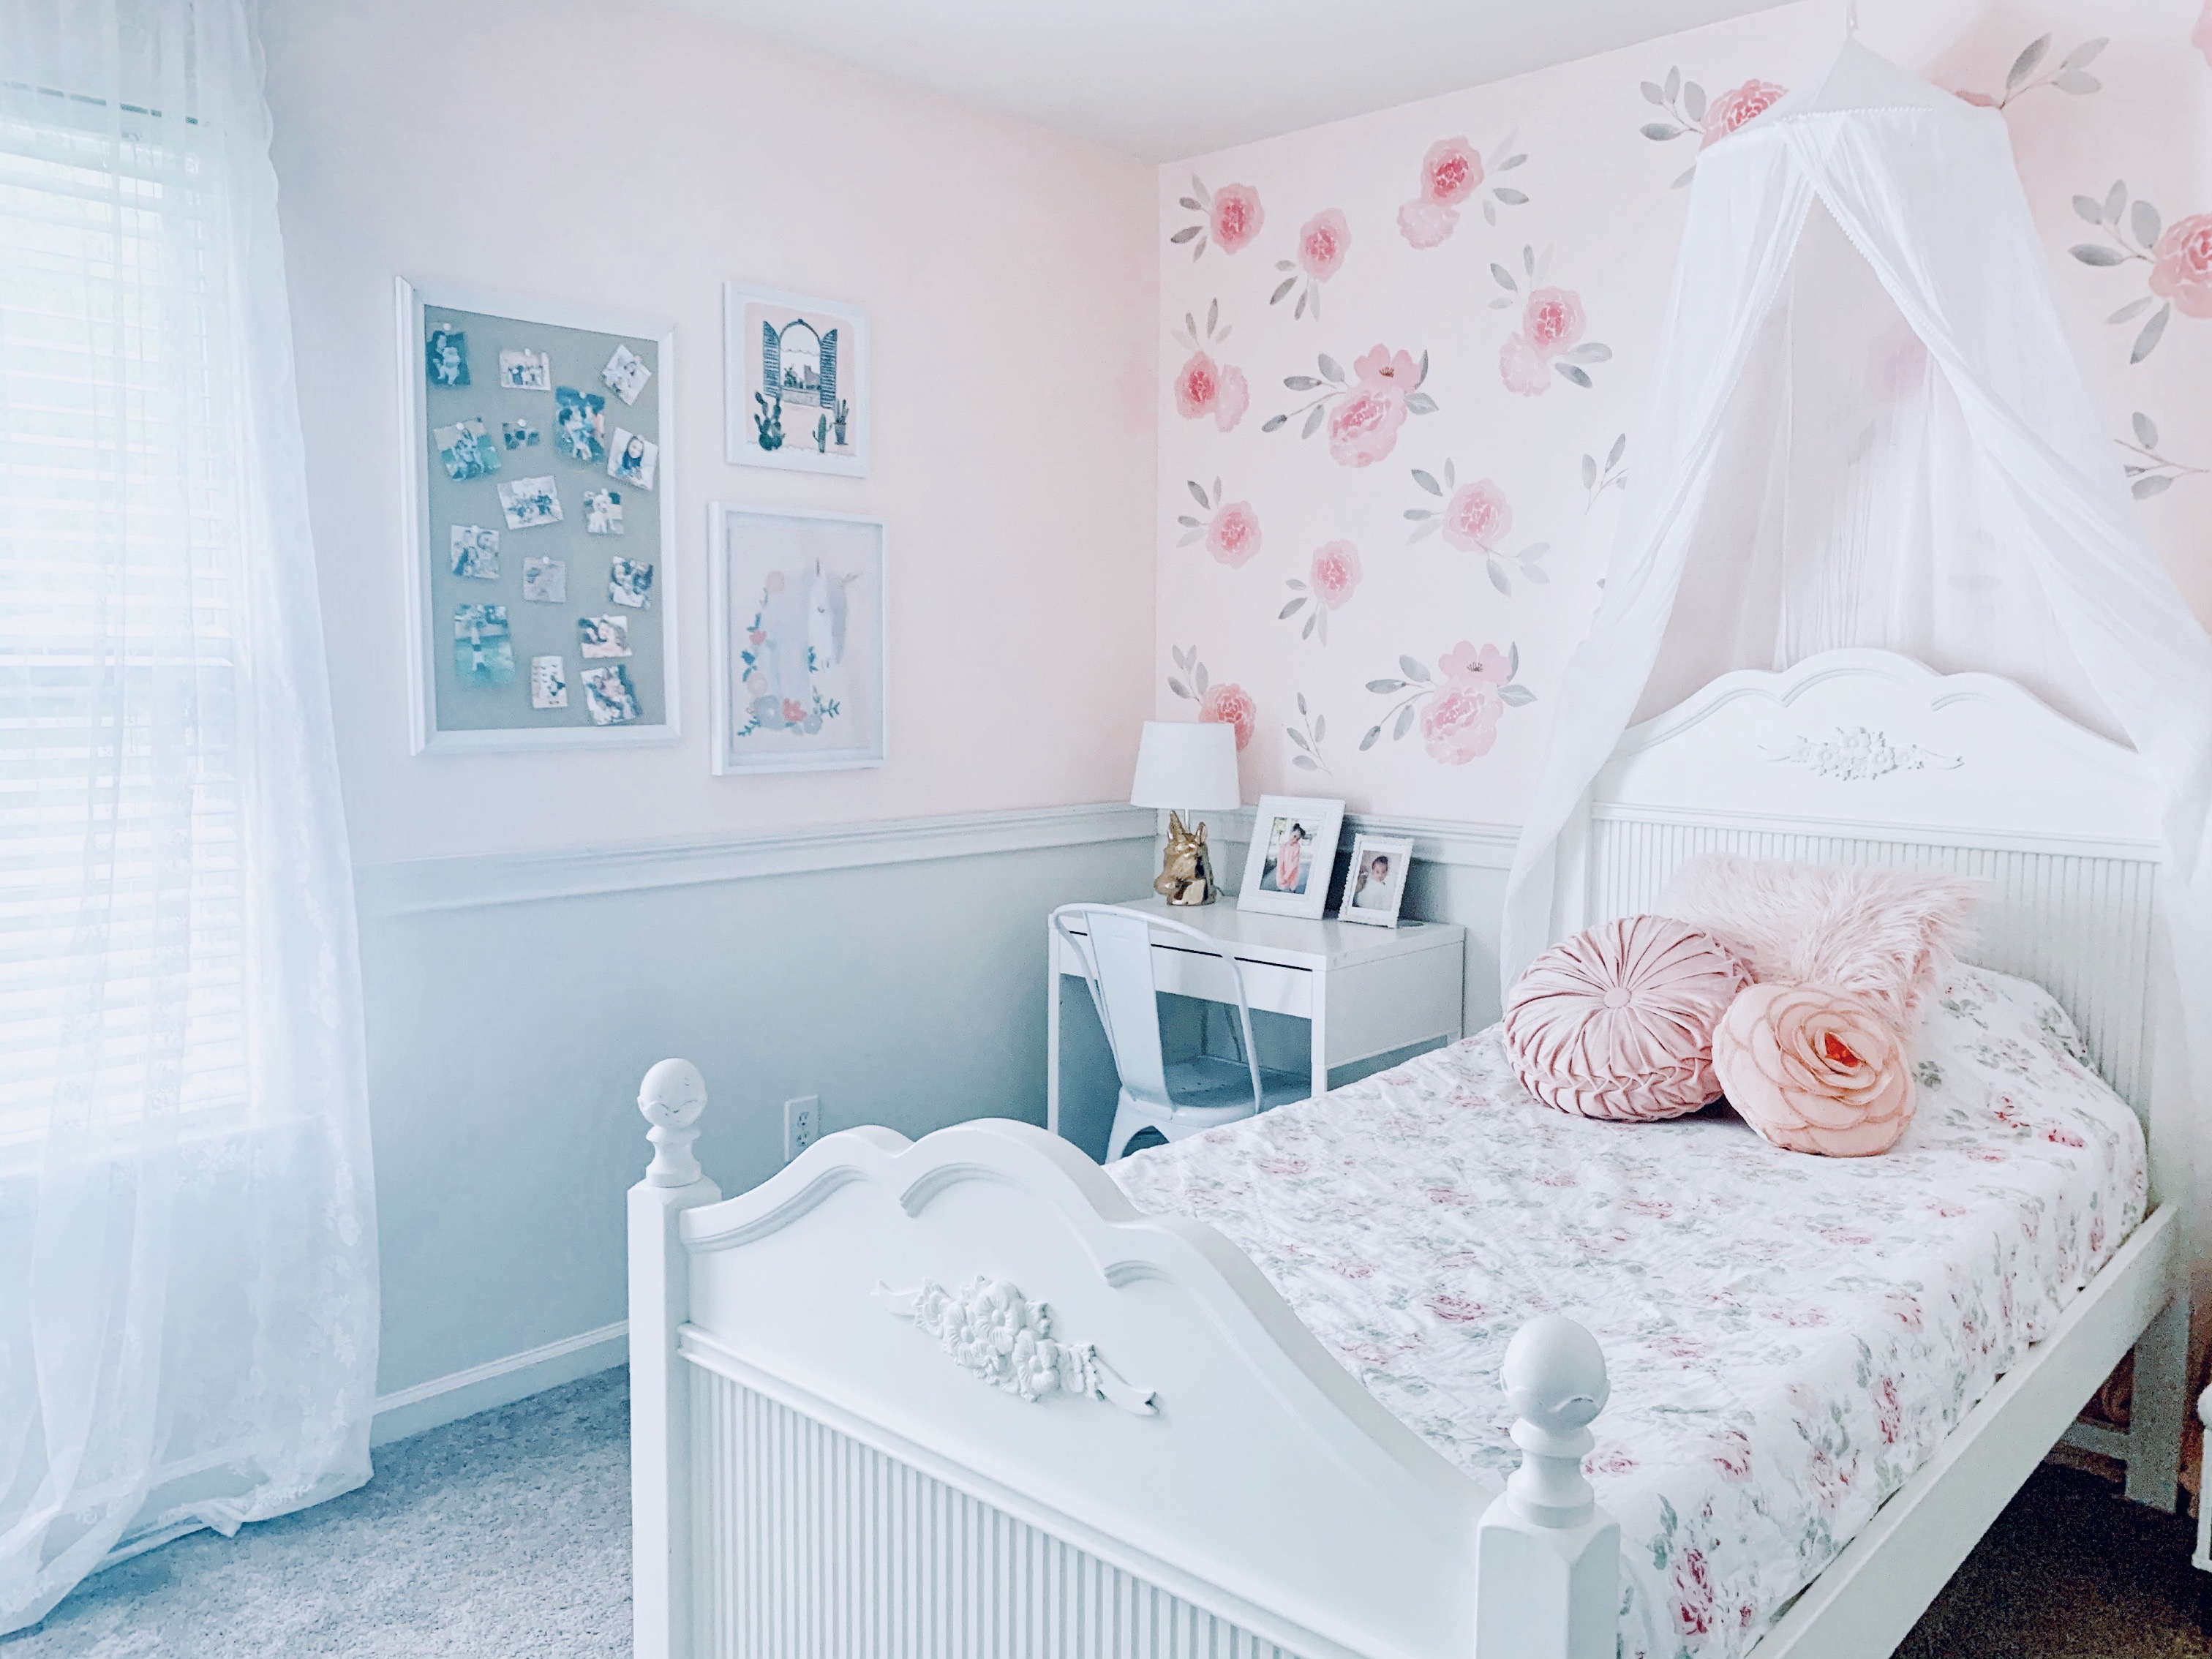 Room Tour: Sienna’s Pink Room with Floral Decals – At Home With Natalie